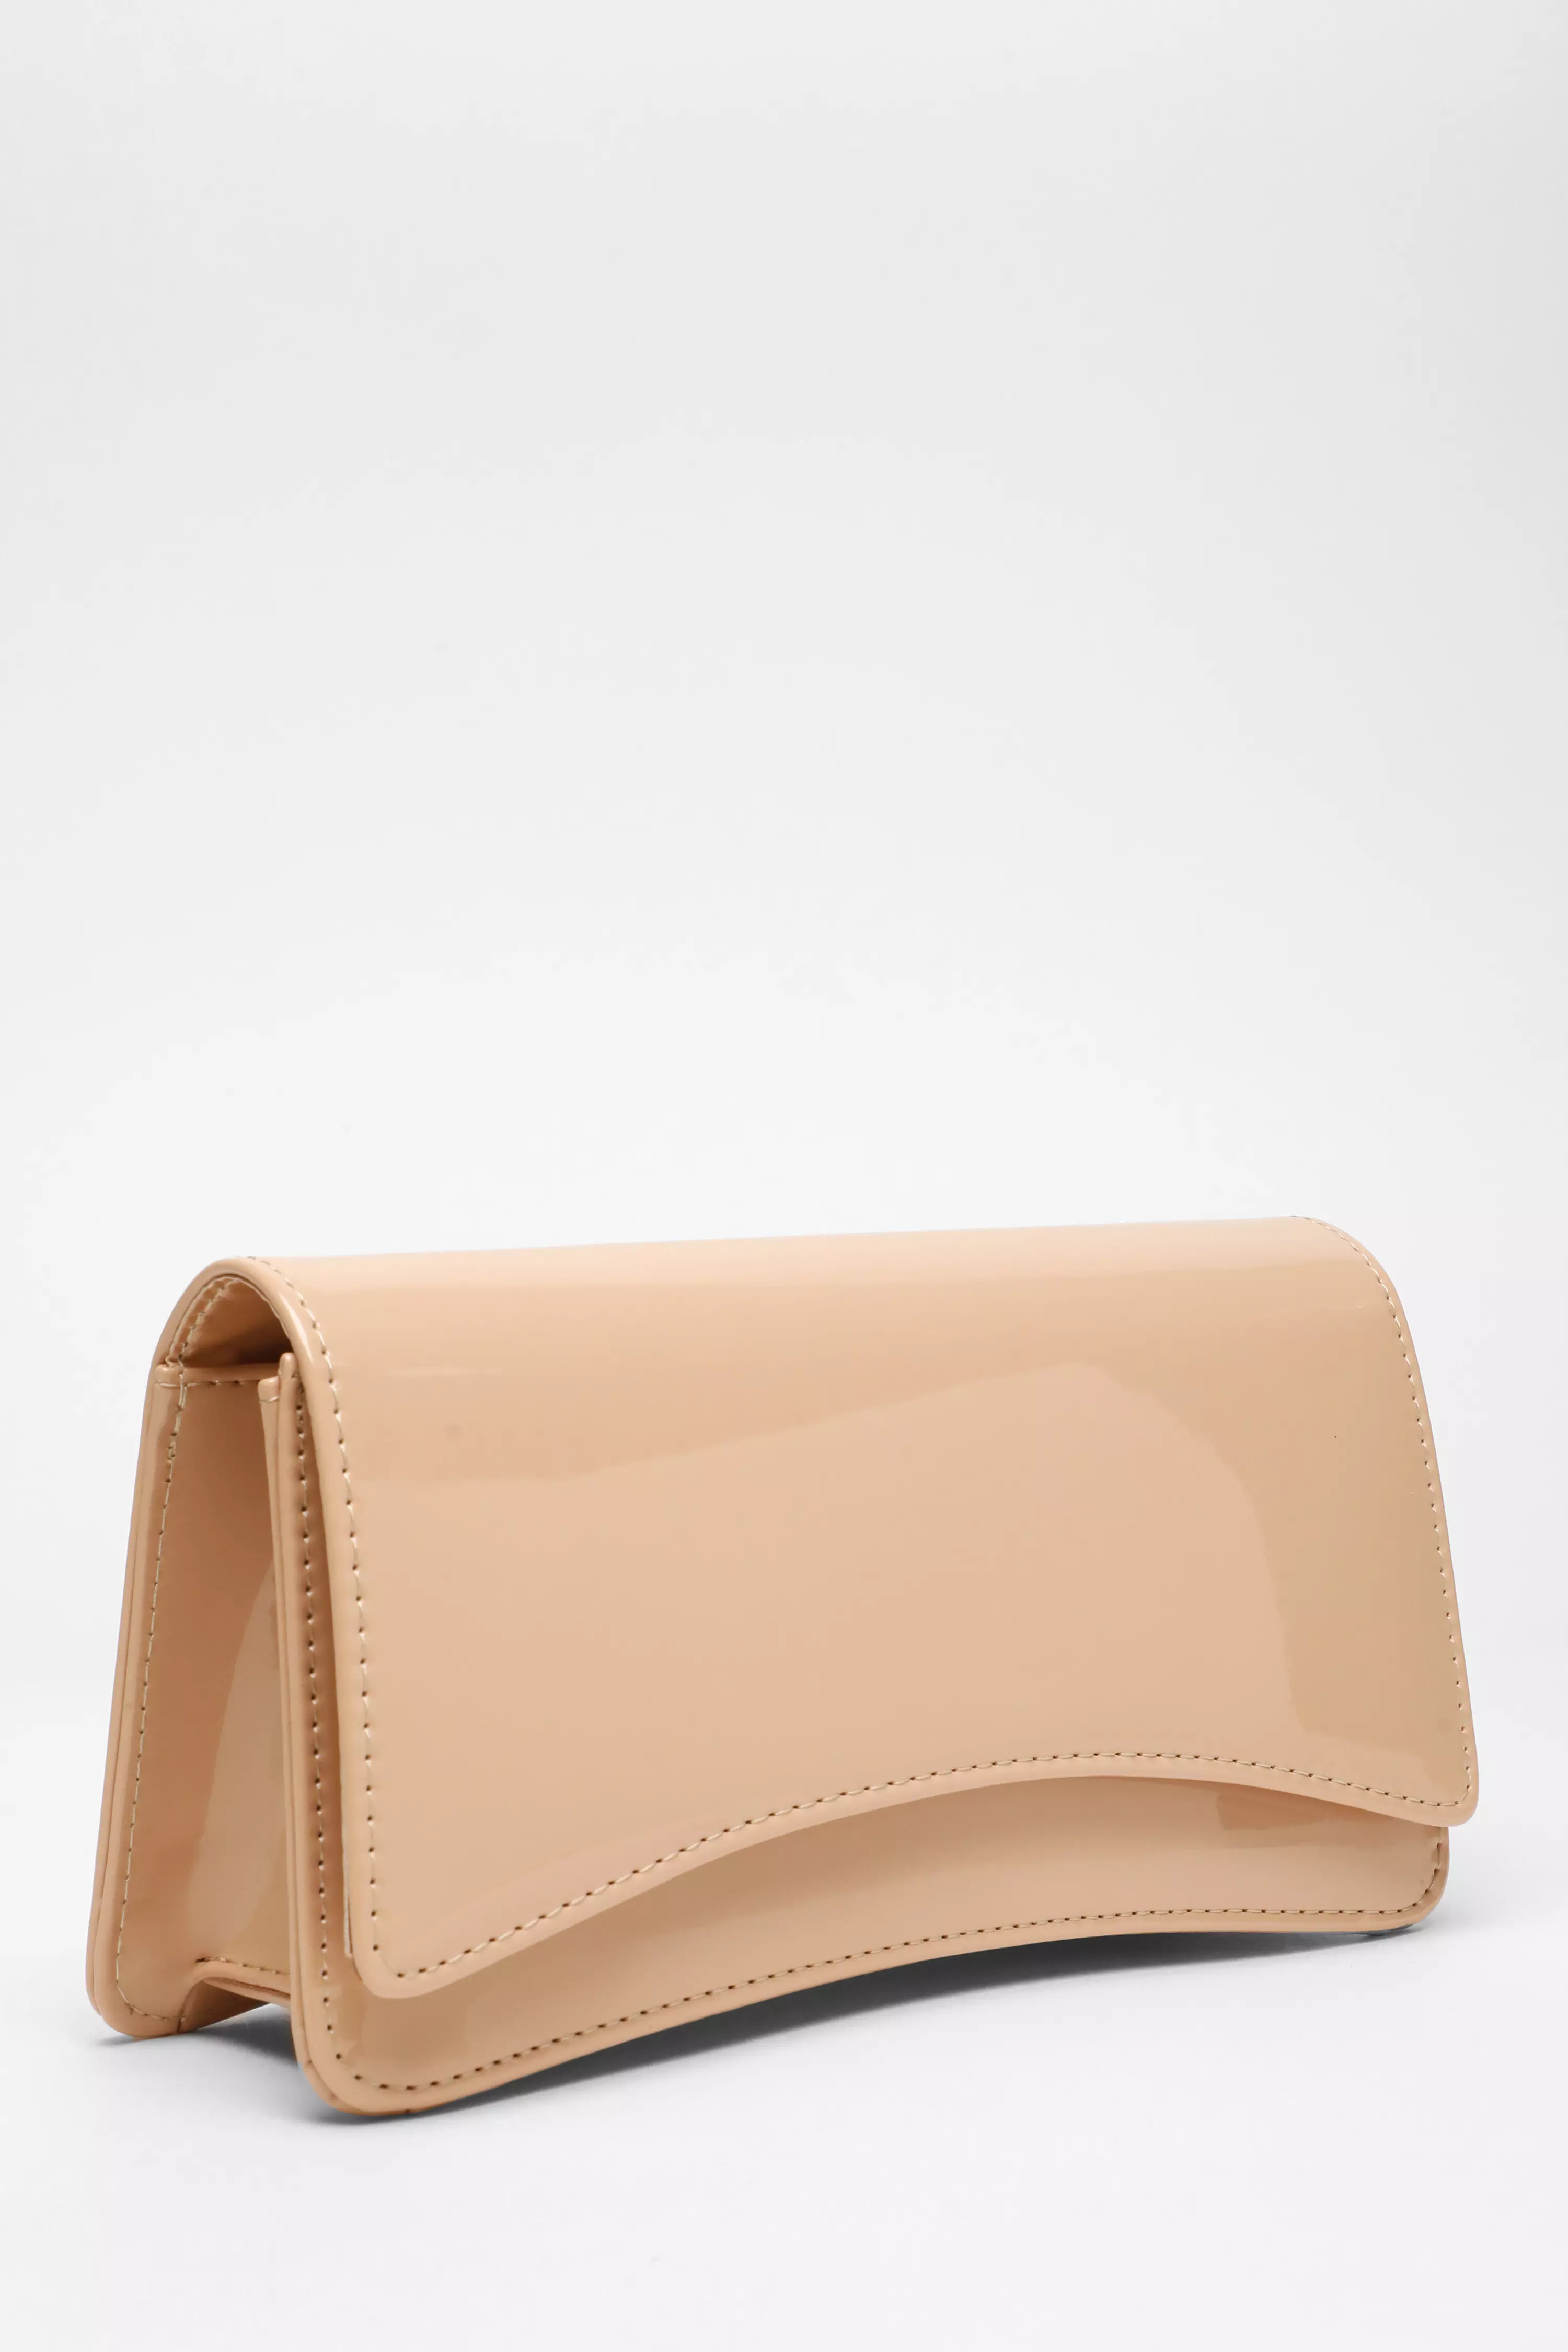 Nude Patent Faux Leather Clutch Bag